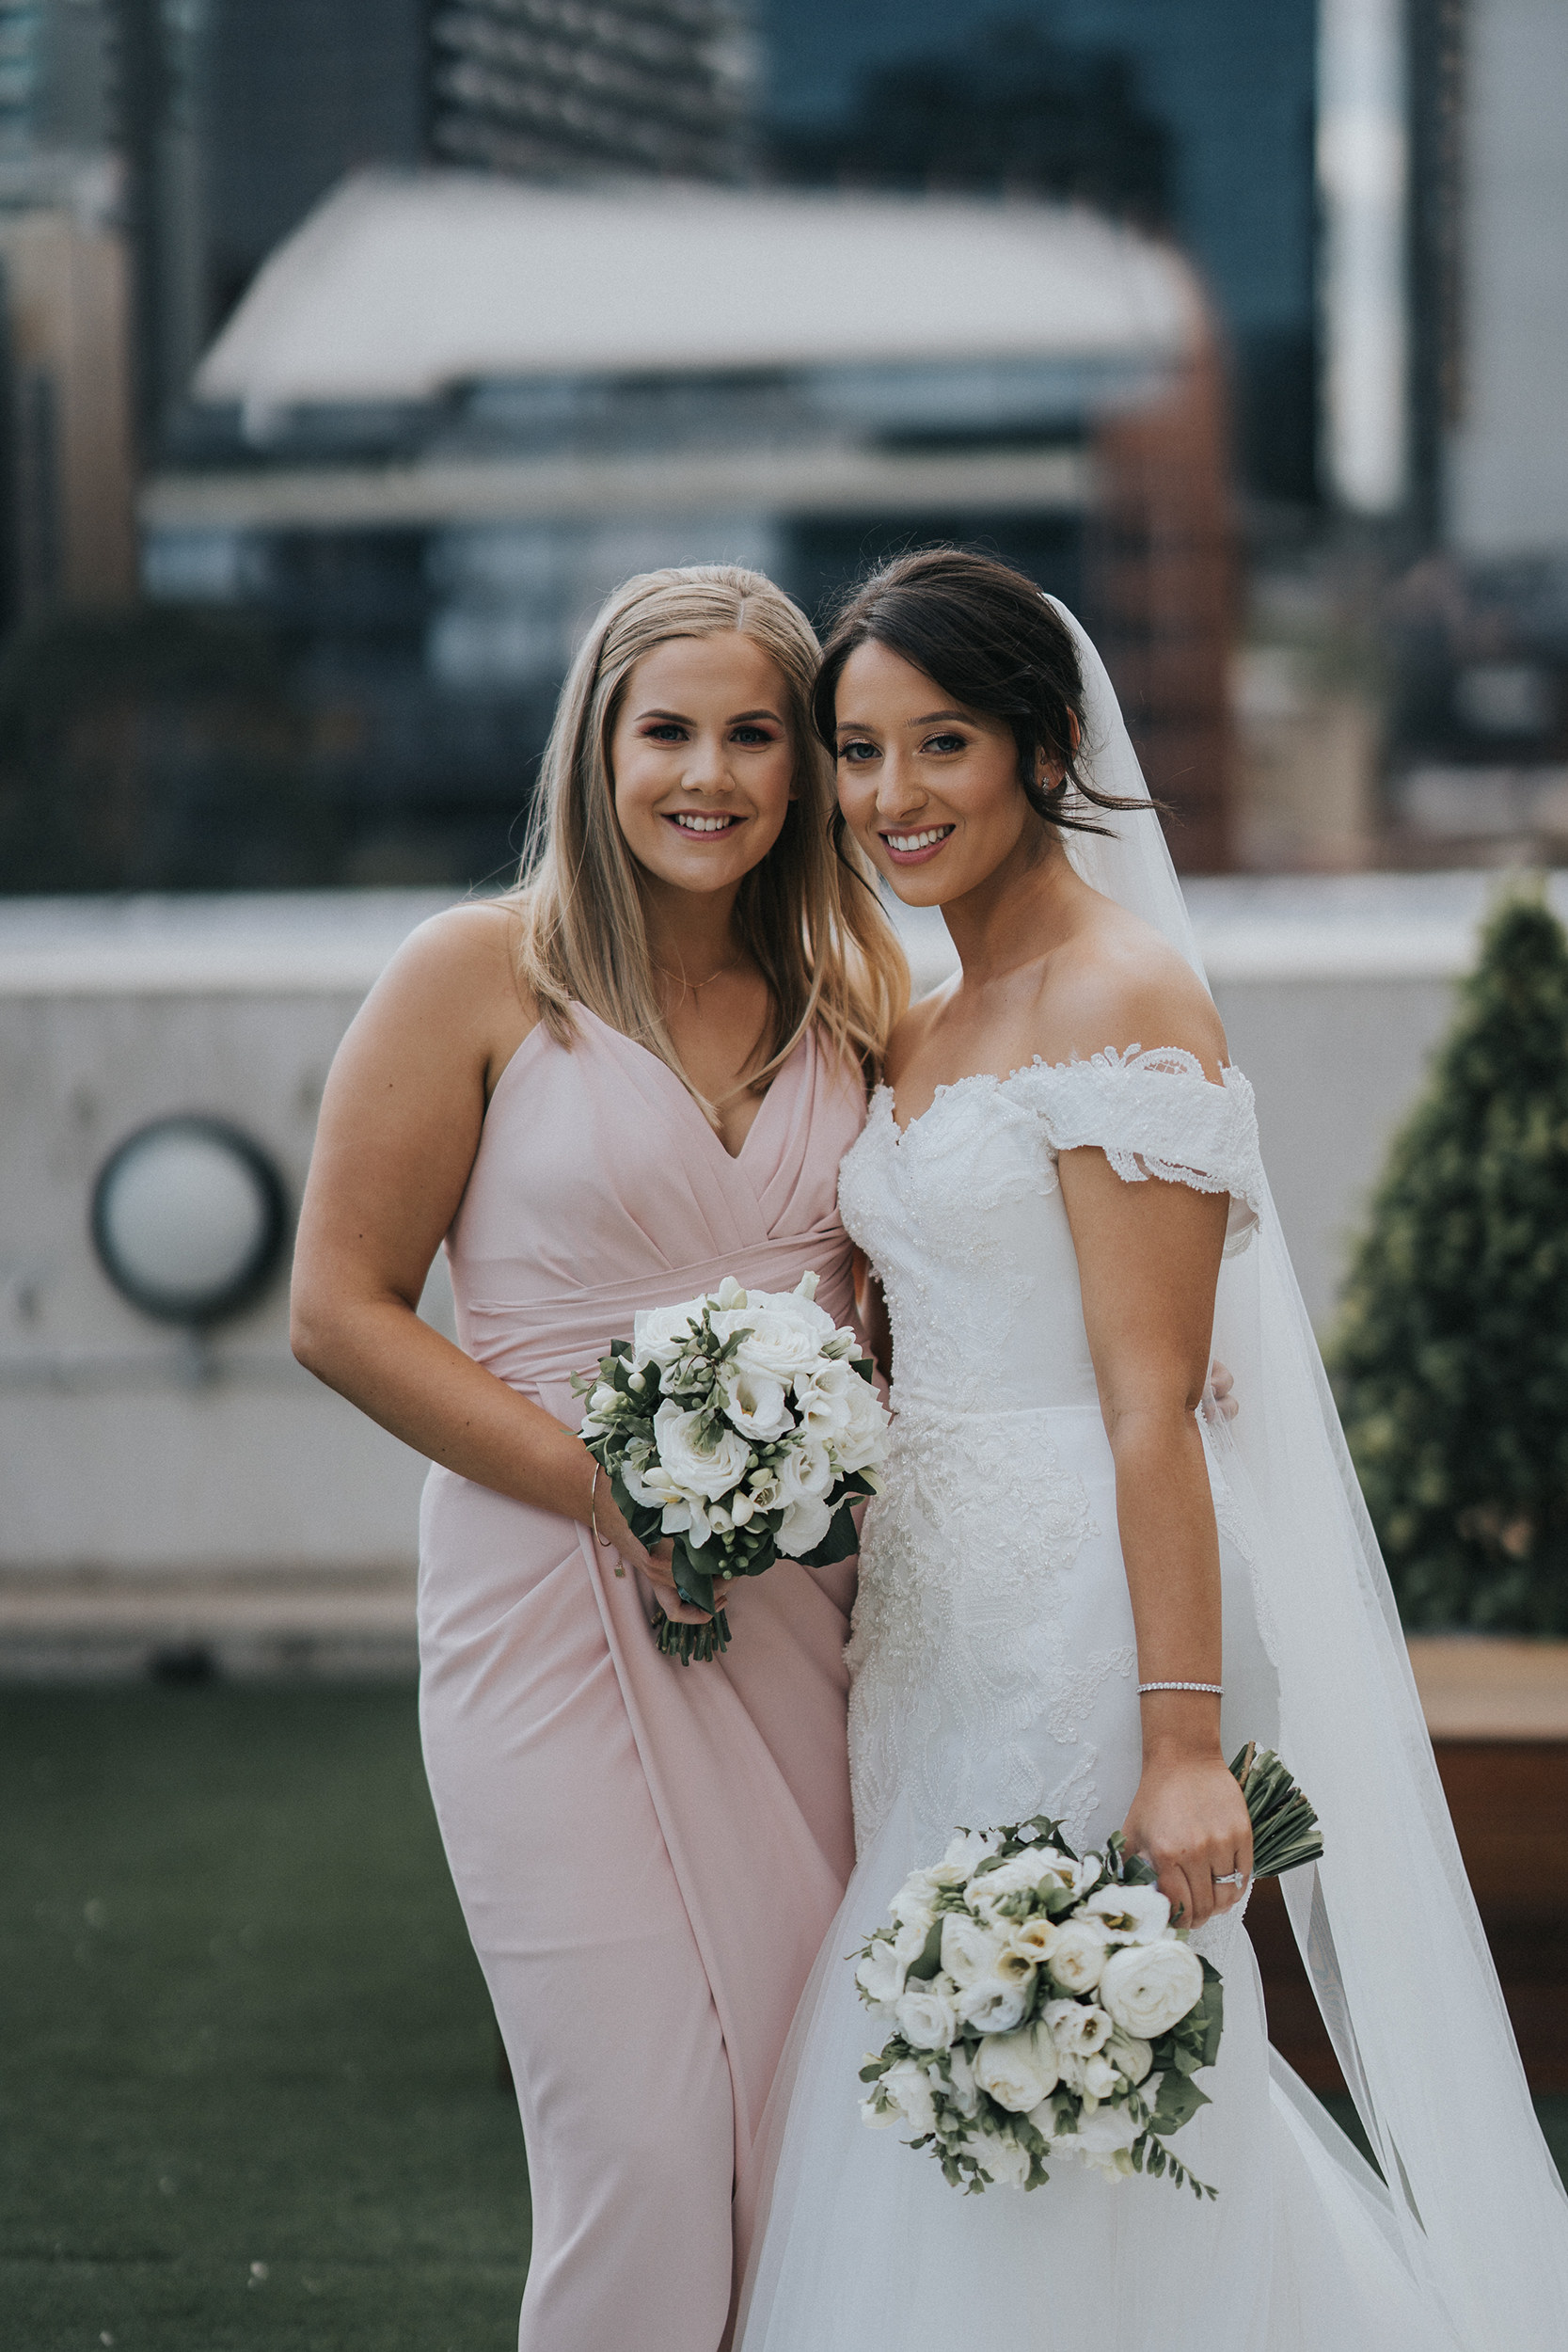 Individual Photographs with your bride party